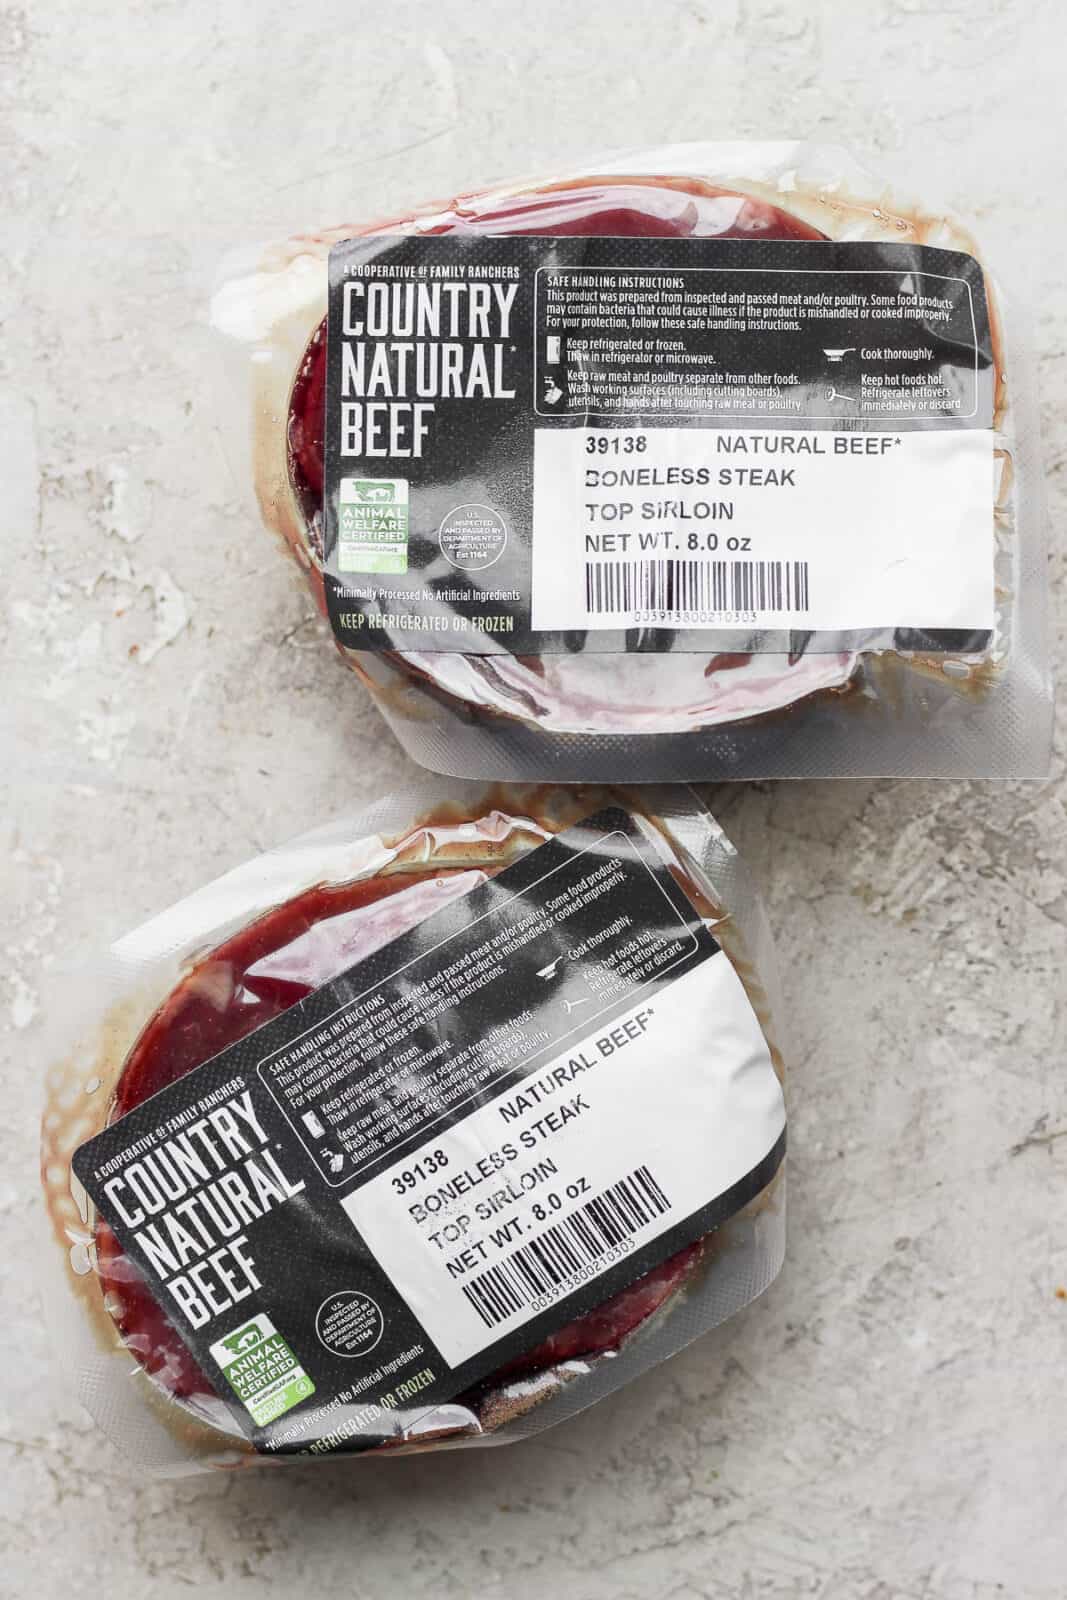 Two packages of Country Natural Beef boneless steak top sirloin.